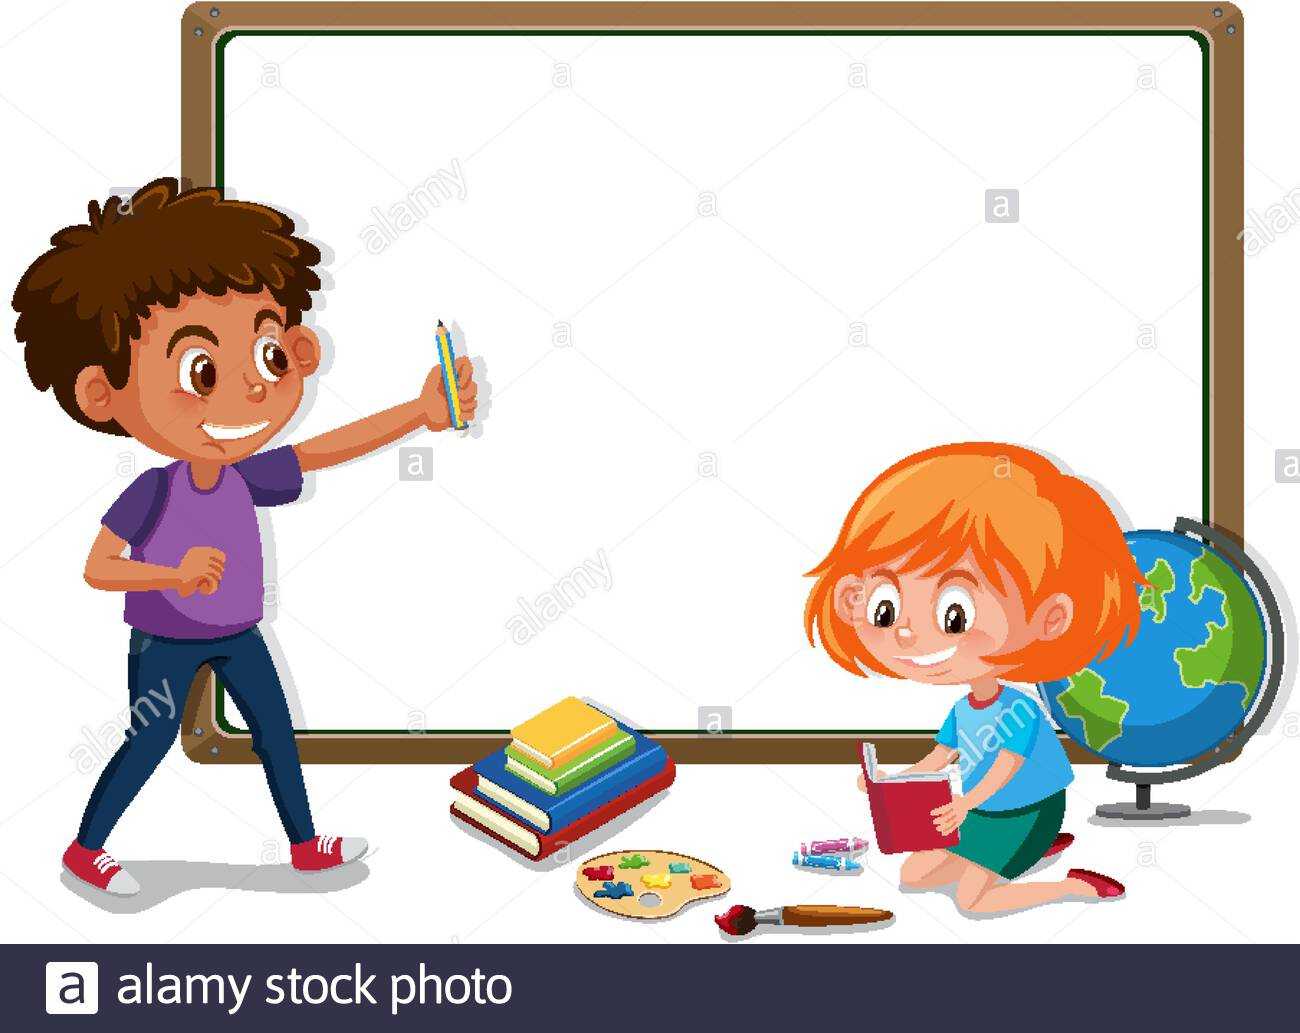 Banner Template With Boy And Girl In The Classroom Pertaining To Classroom Banner Template